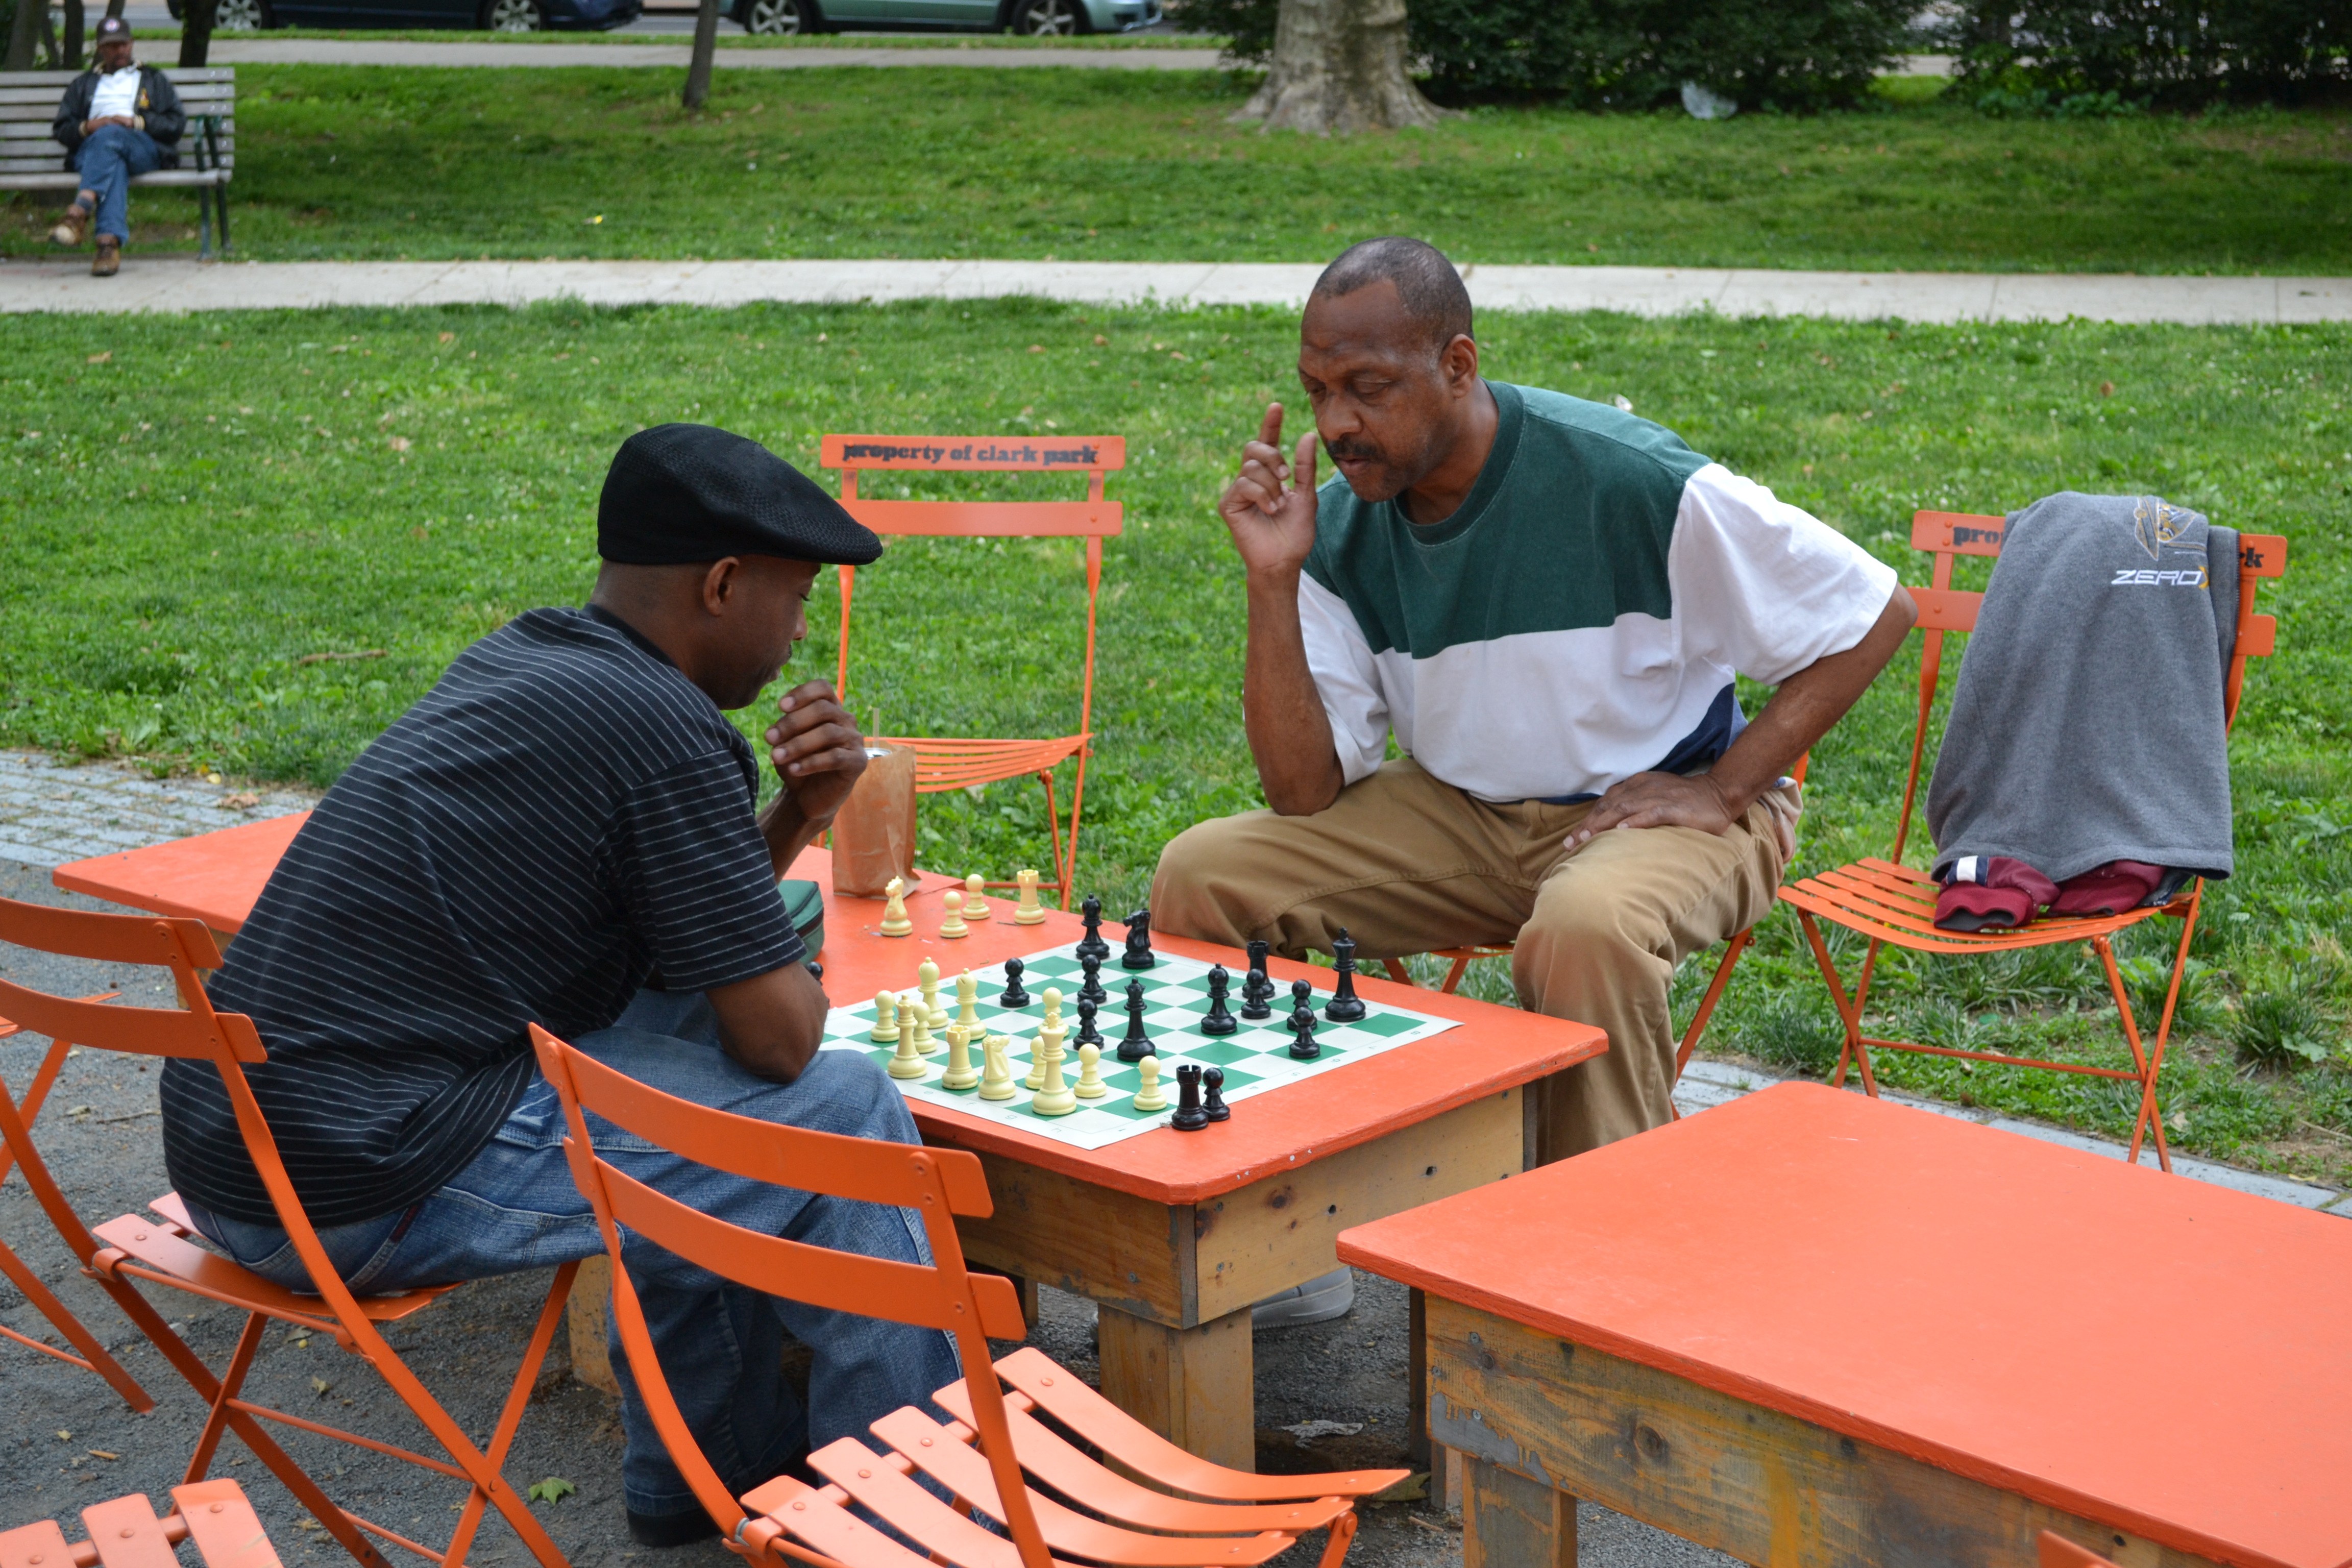 A chess game captivated some park goers